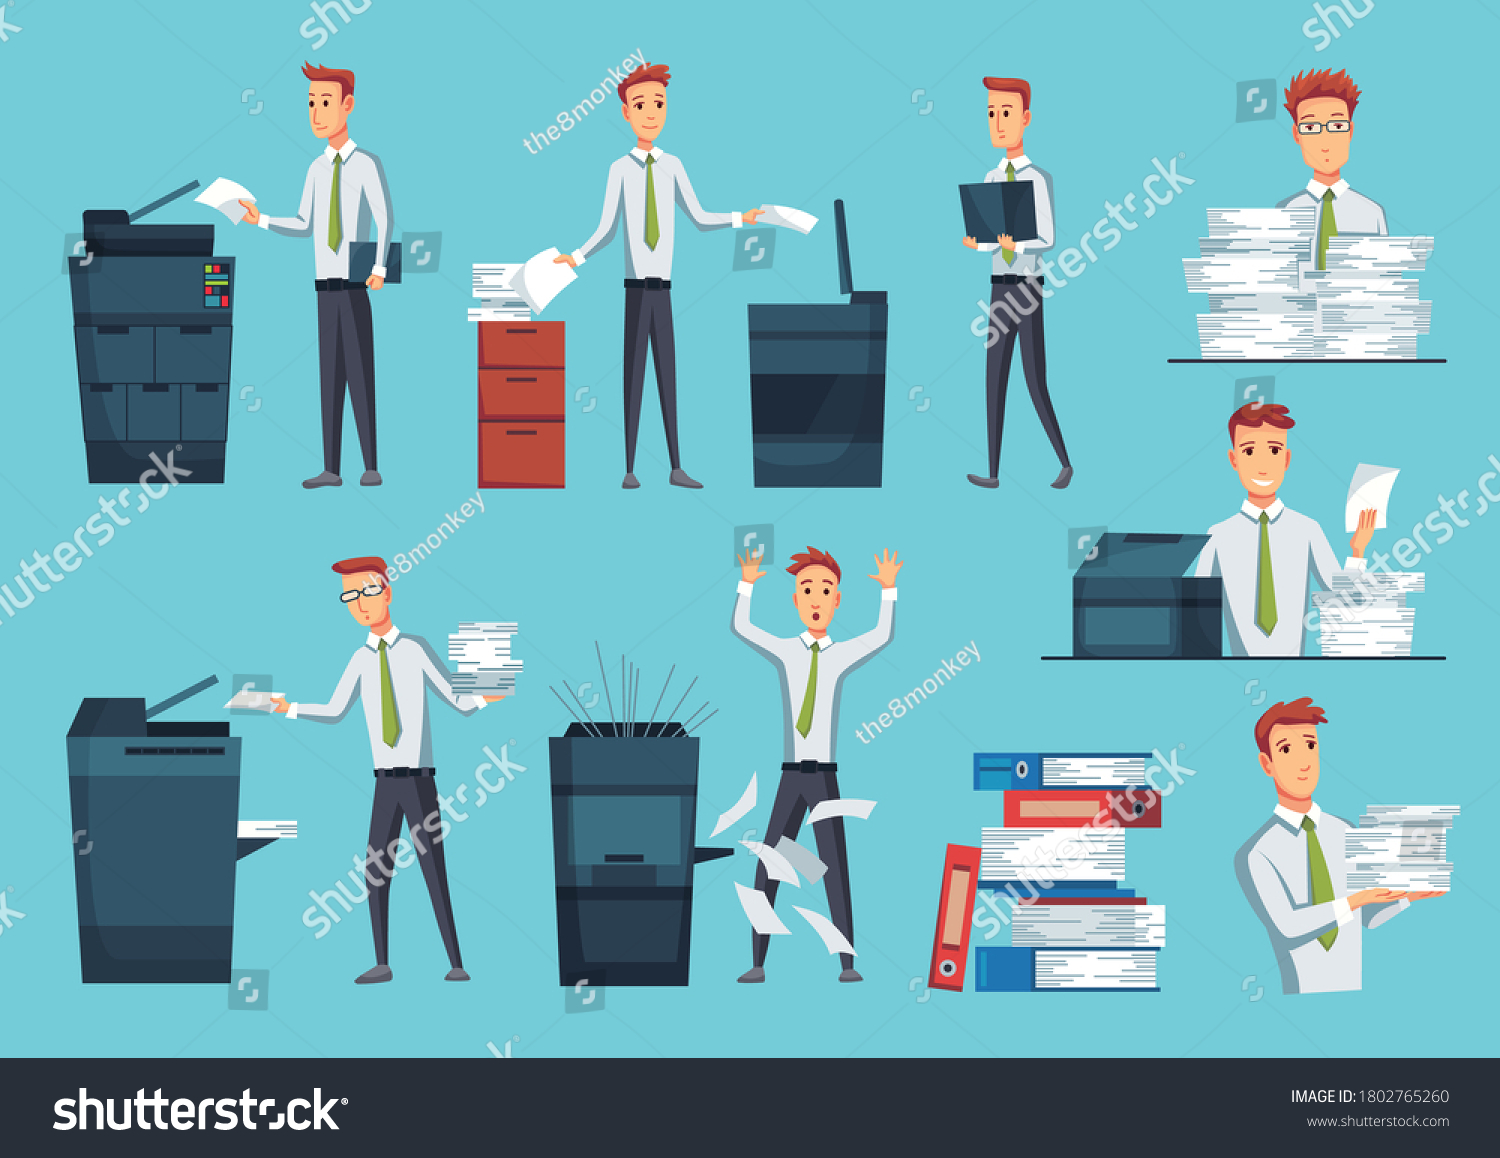 Collection of office documents copiers. Office workers prints documents on the copier. Mans works on a photocopier. Concept of office work #1802765260